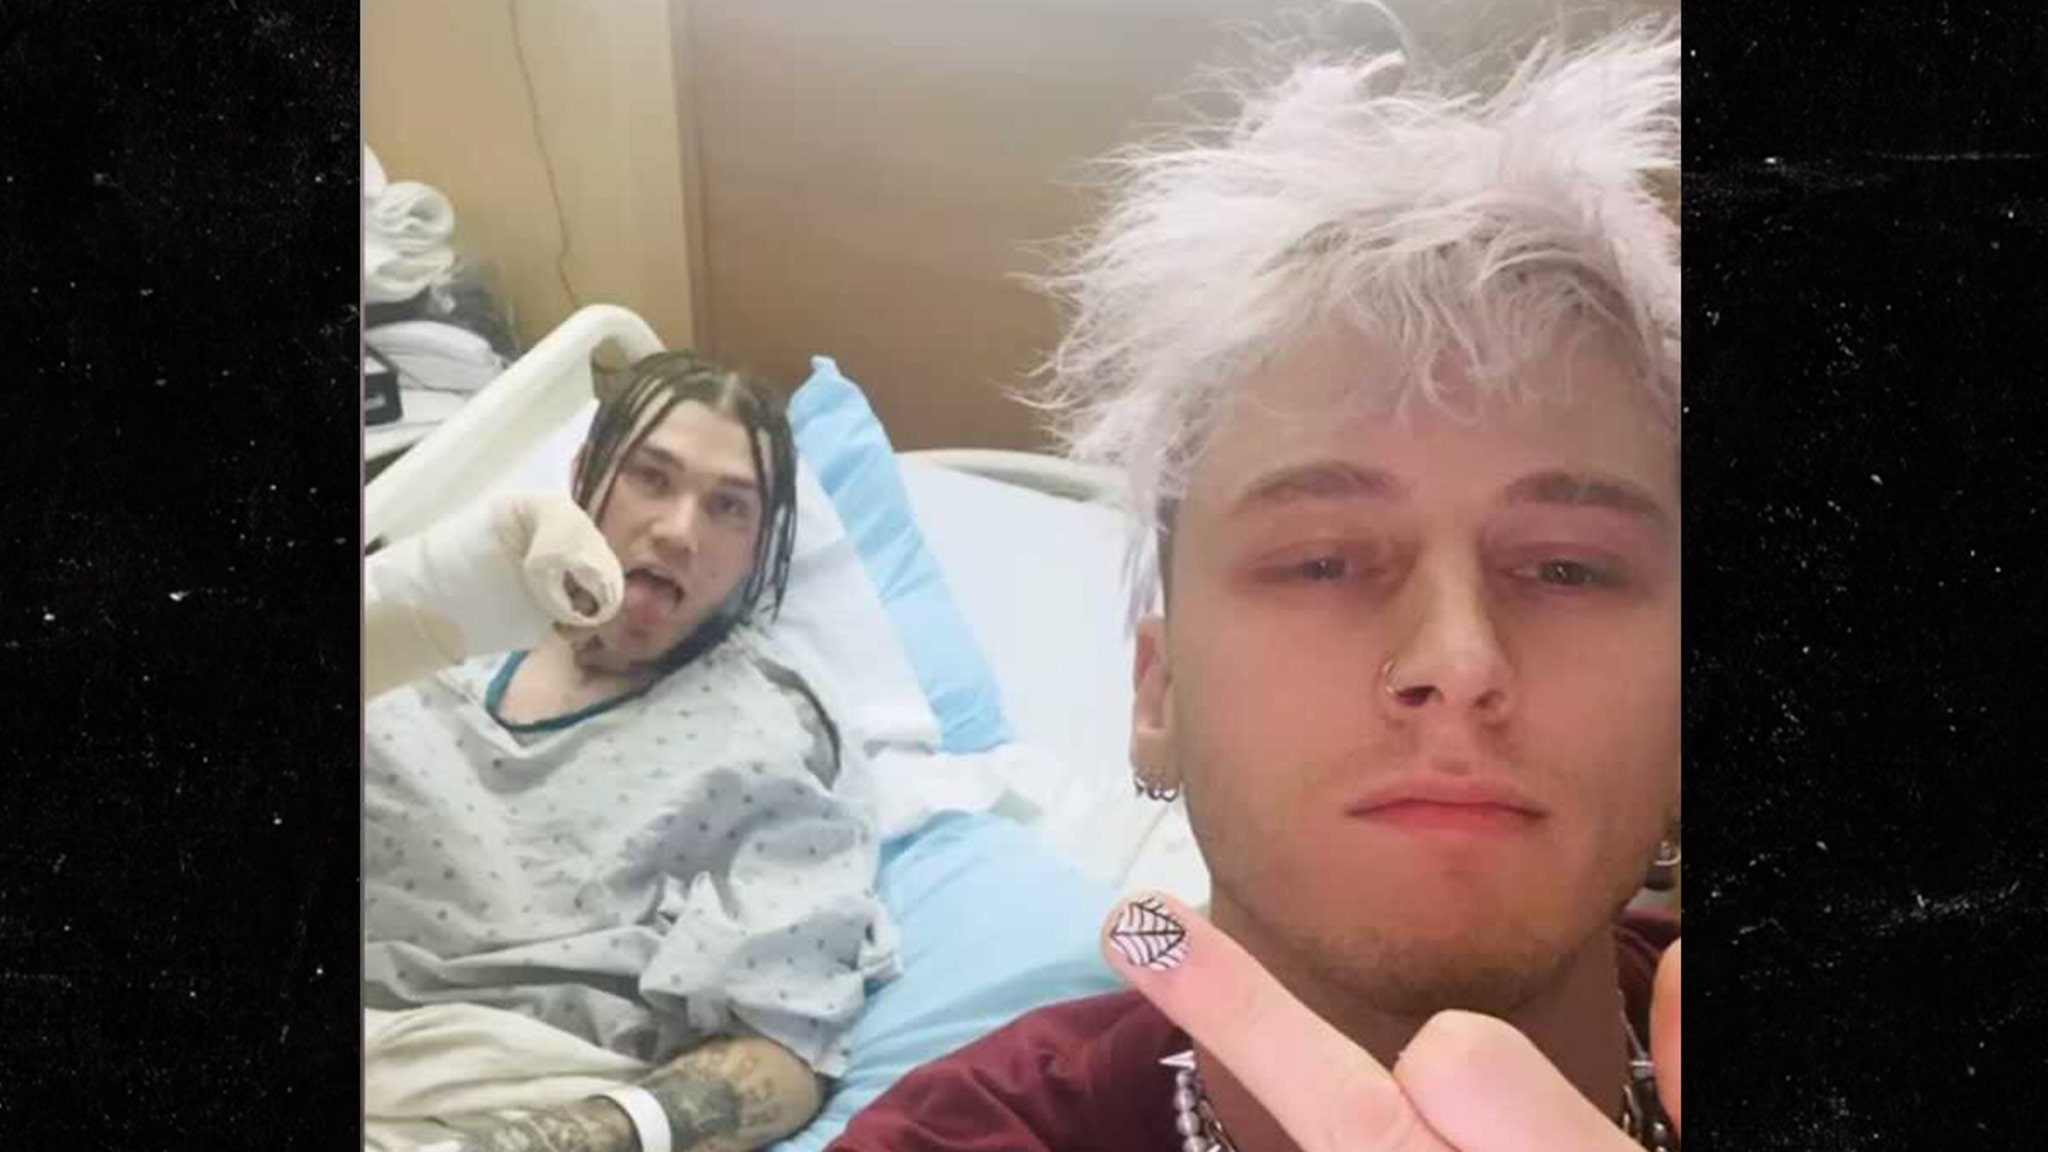 Machine gun Kelly’s drummer robbed and hit by car, hospitalized